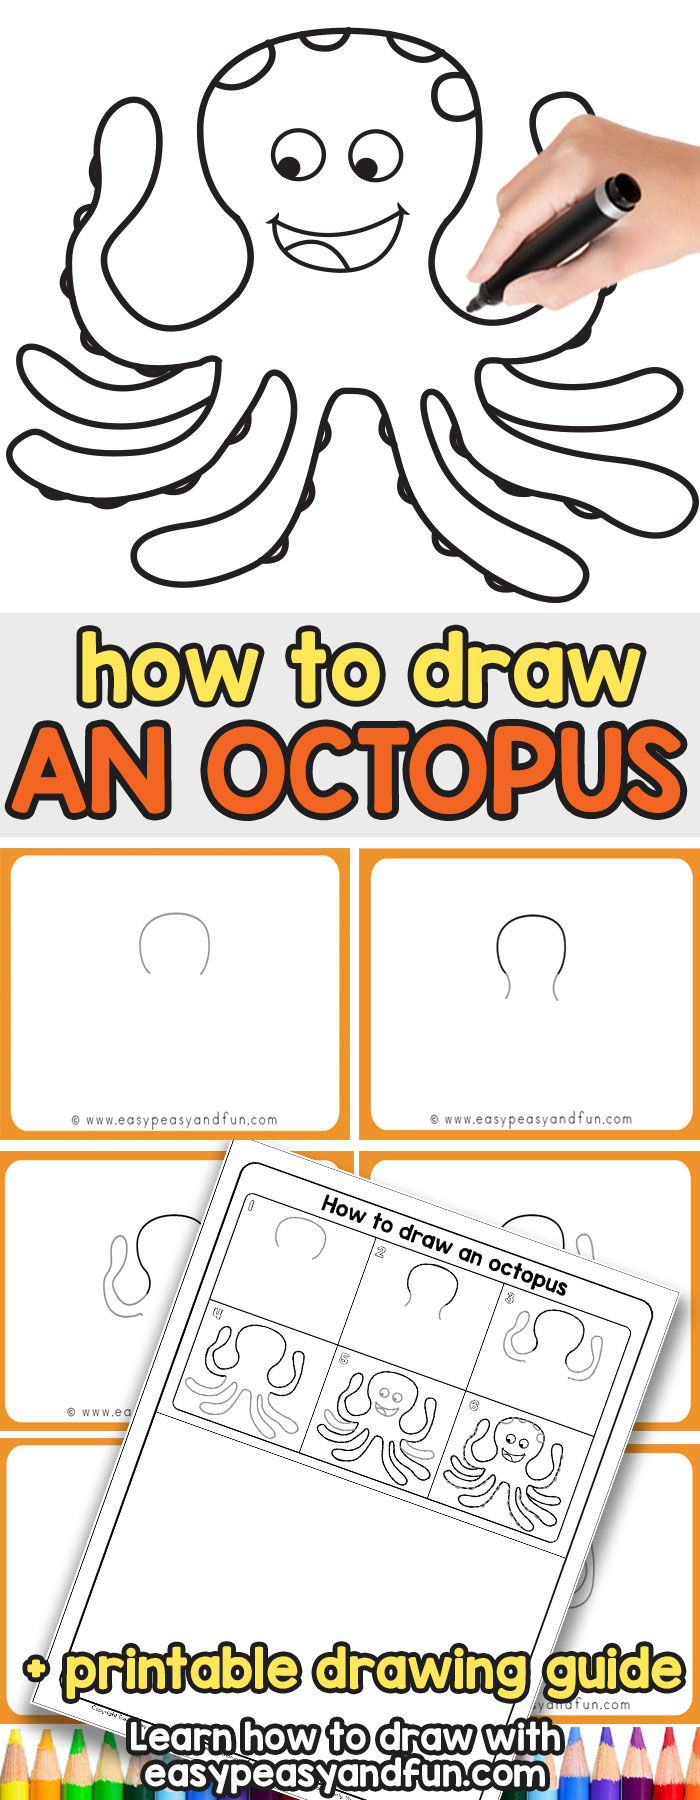 How to Draw an Octopus